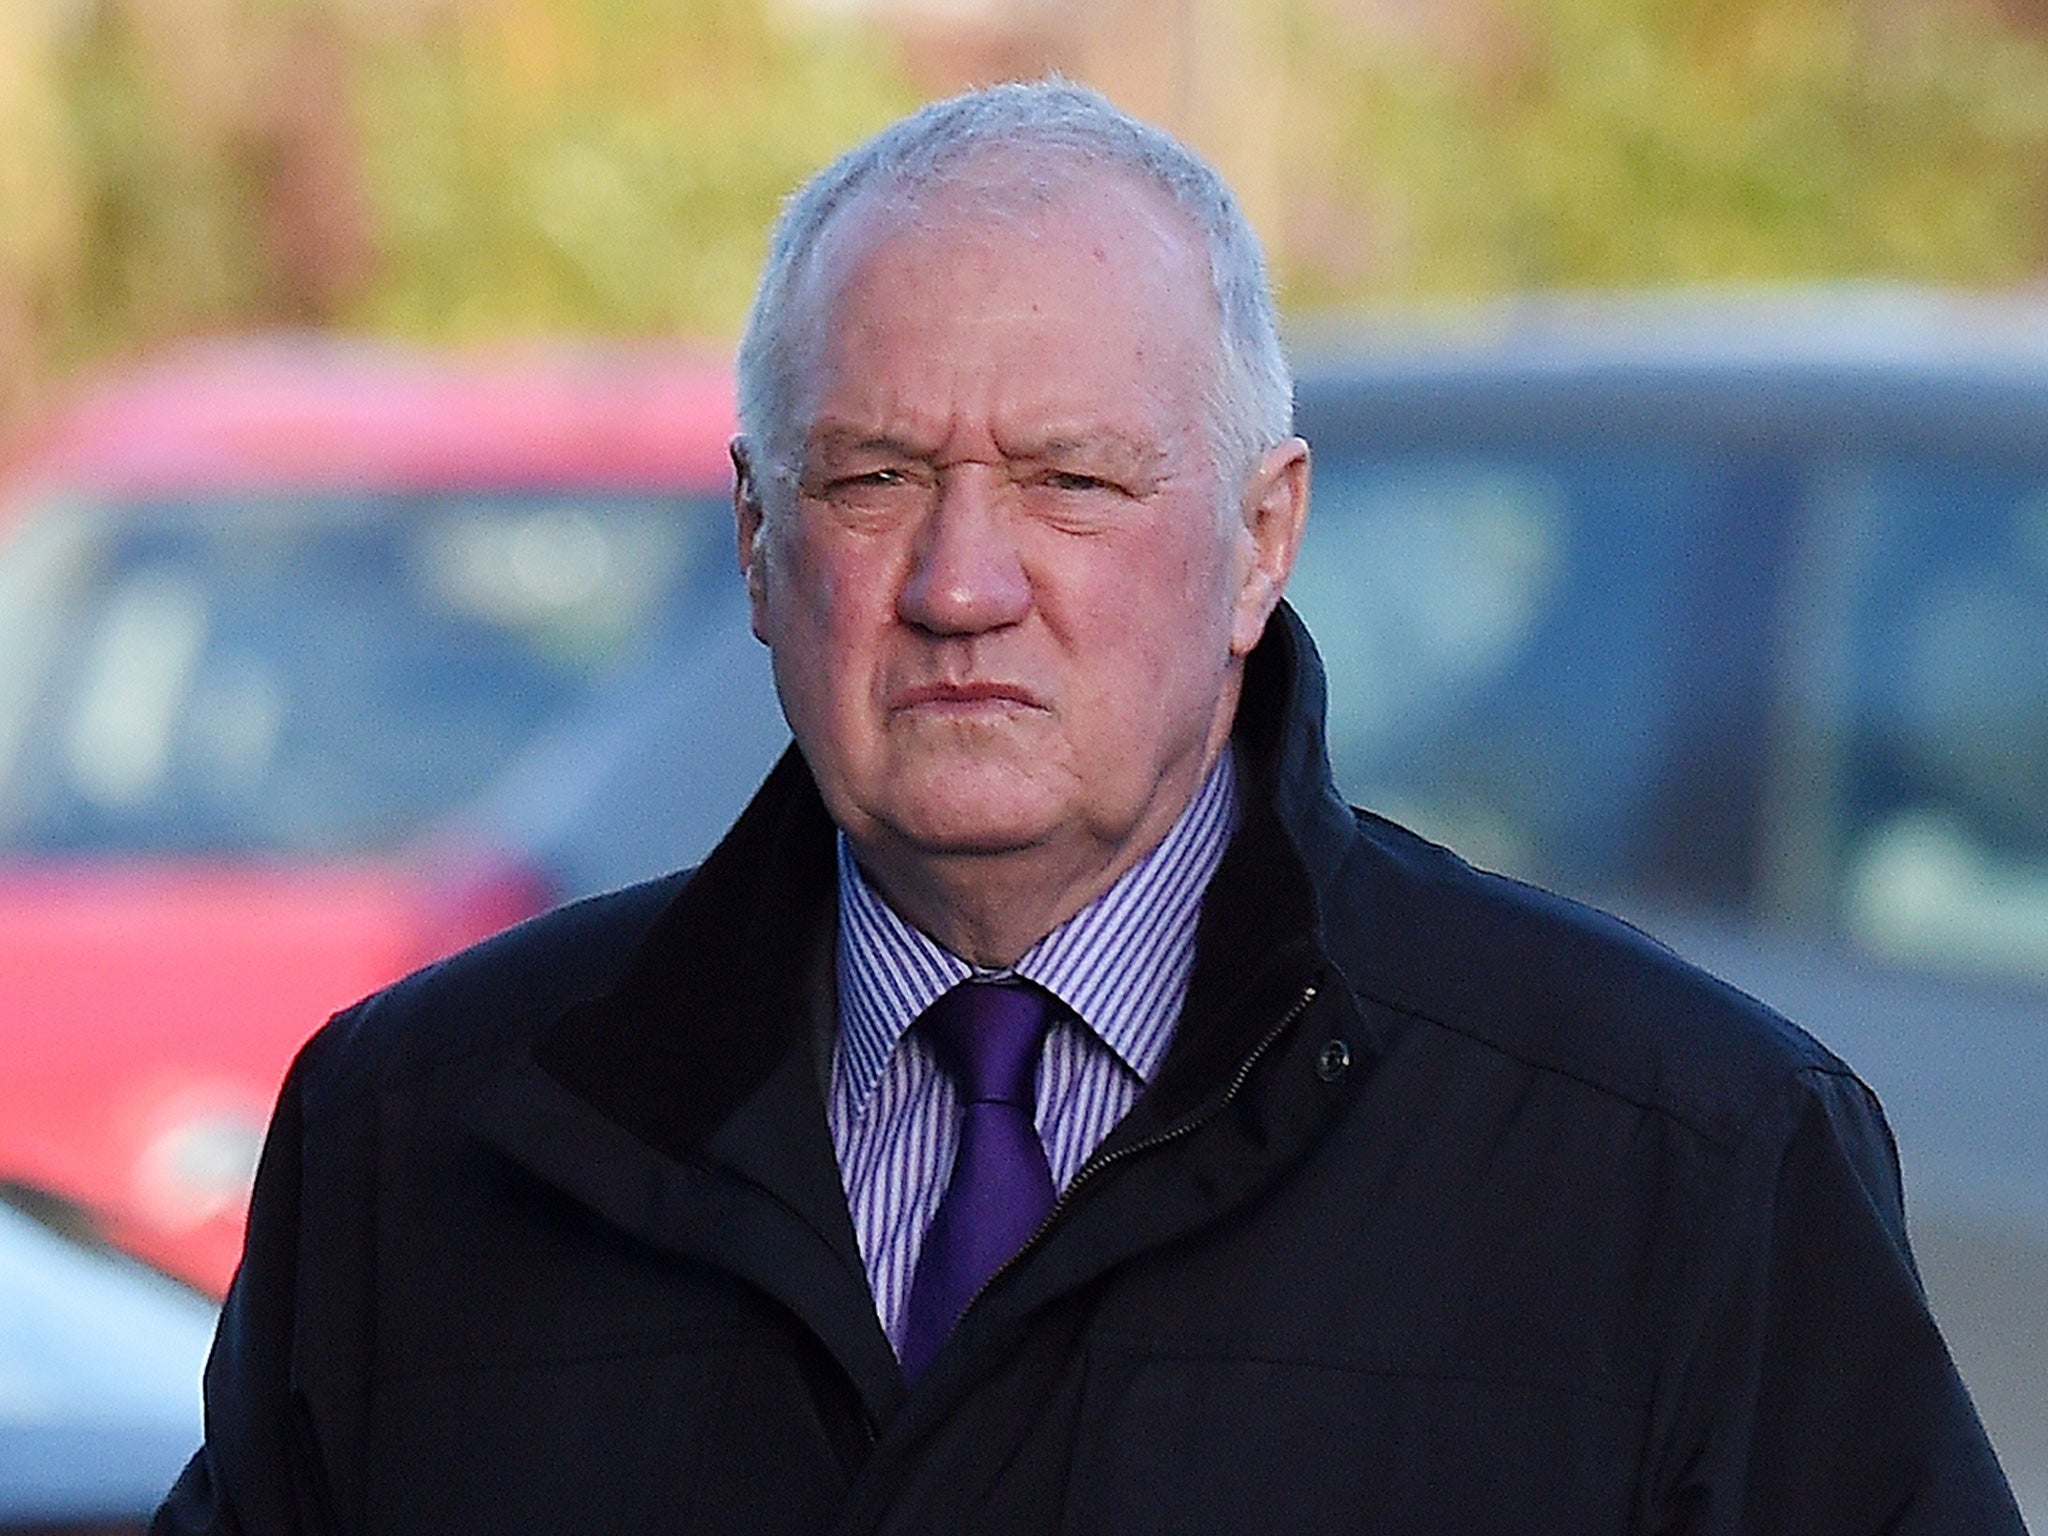 David Duckenfield said his decision to open Gate C was a ‘mistake’ rather than negligence